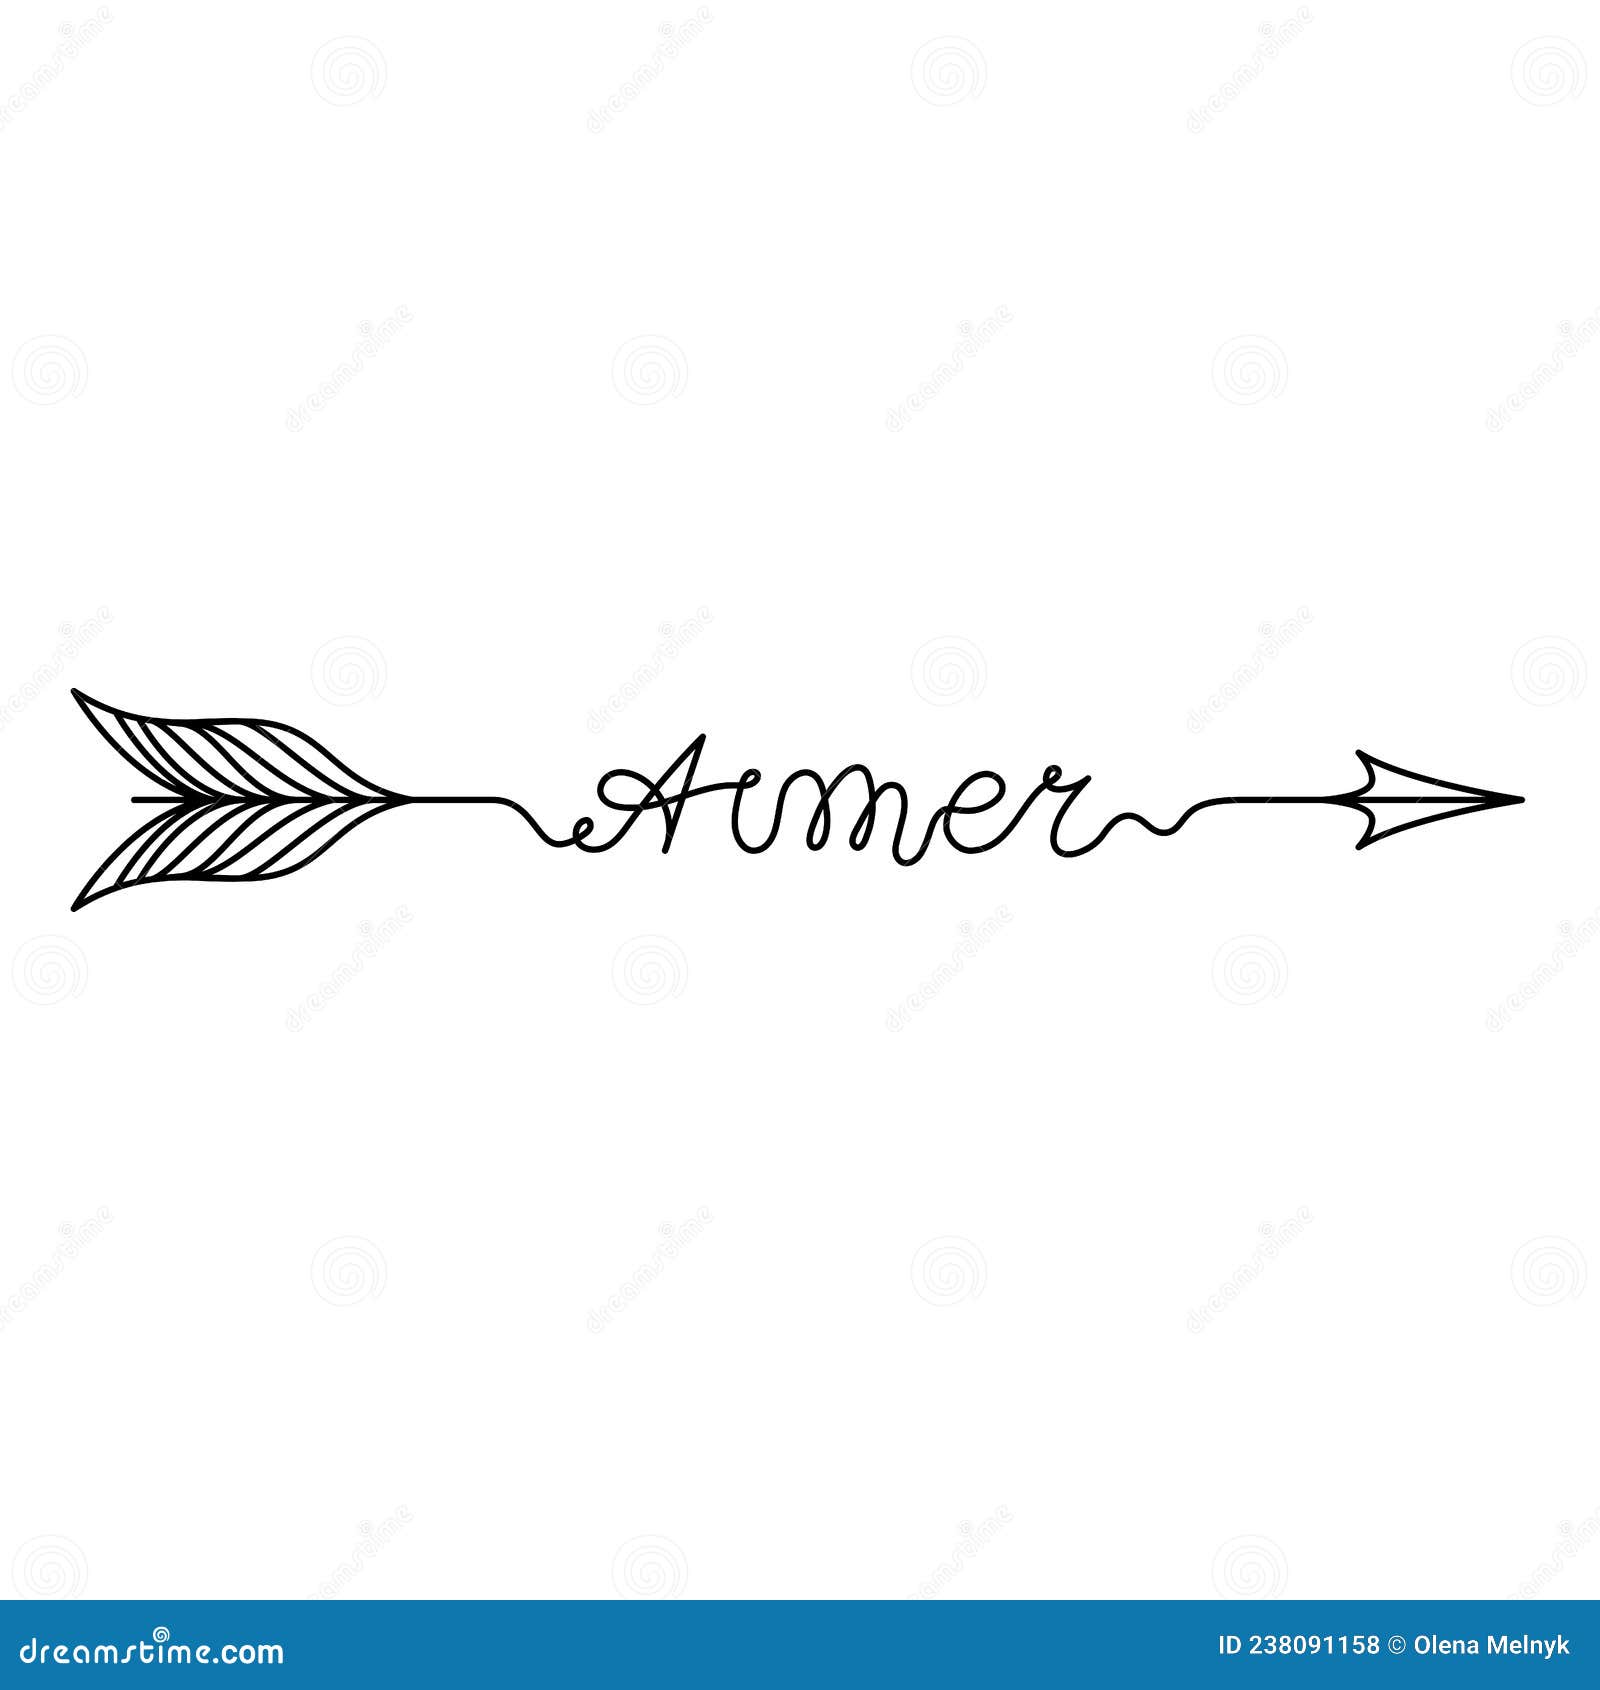 continuous one line lettering aimer love in french in the form of an arrow.   for poster, card, banner